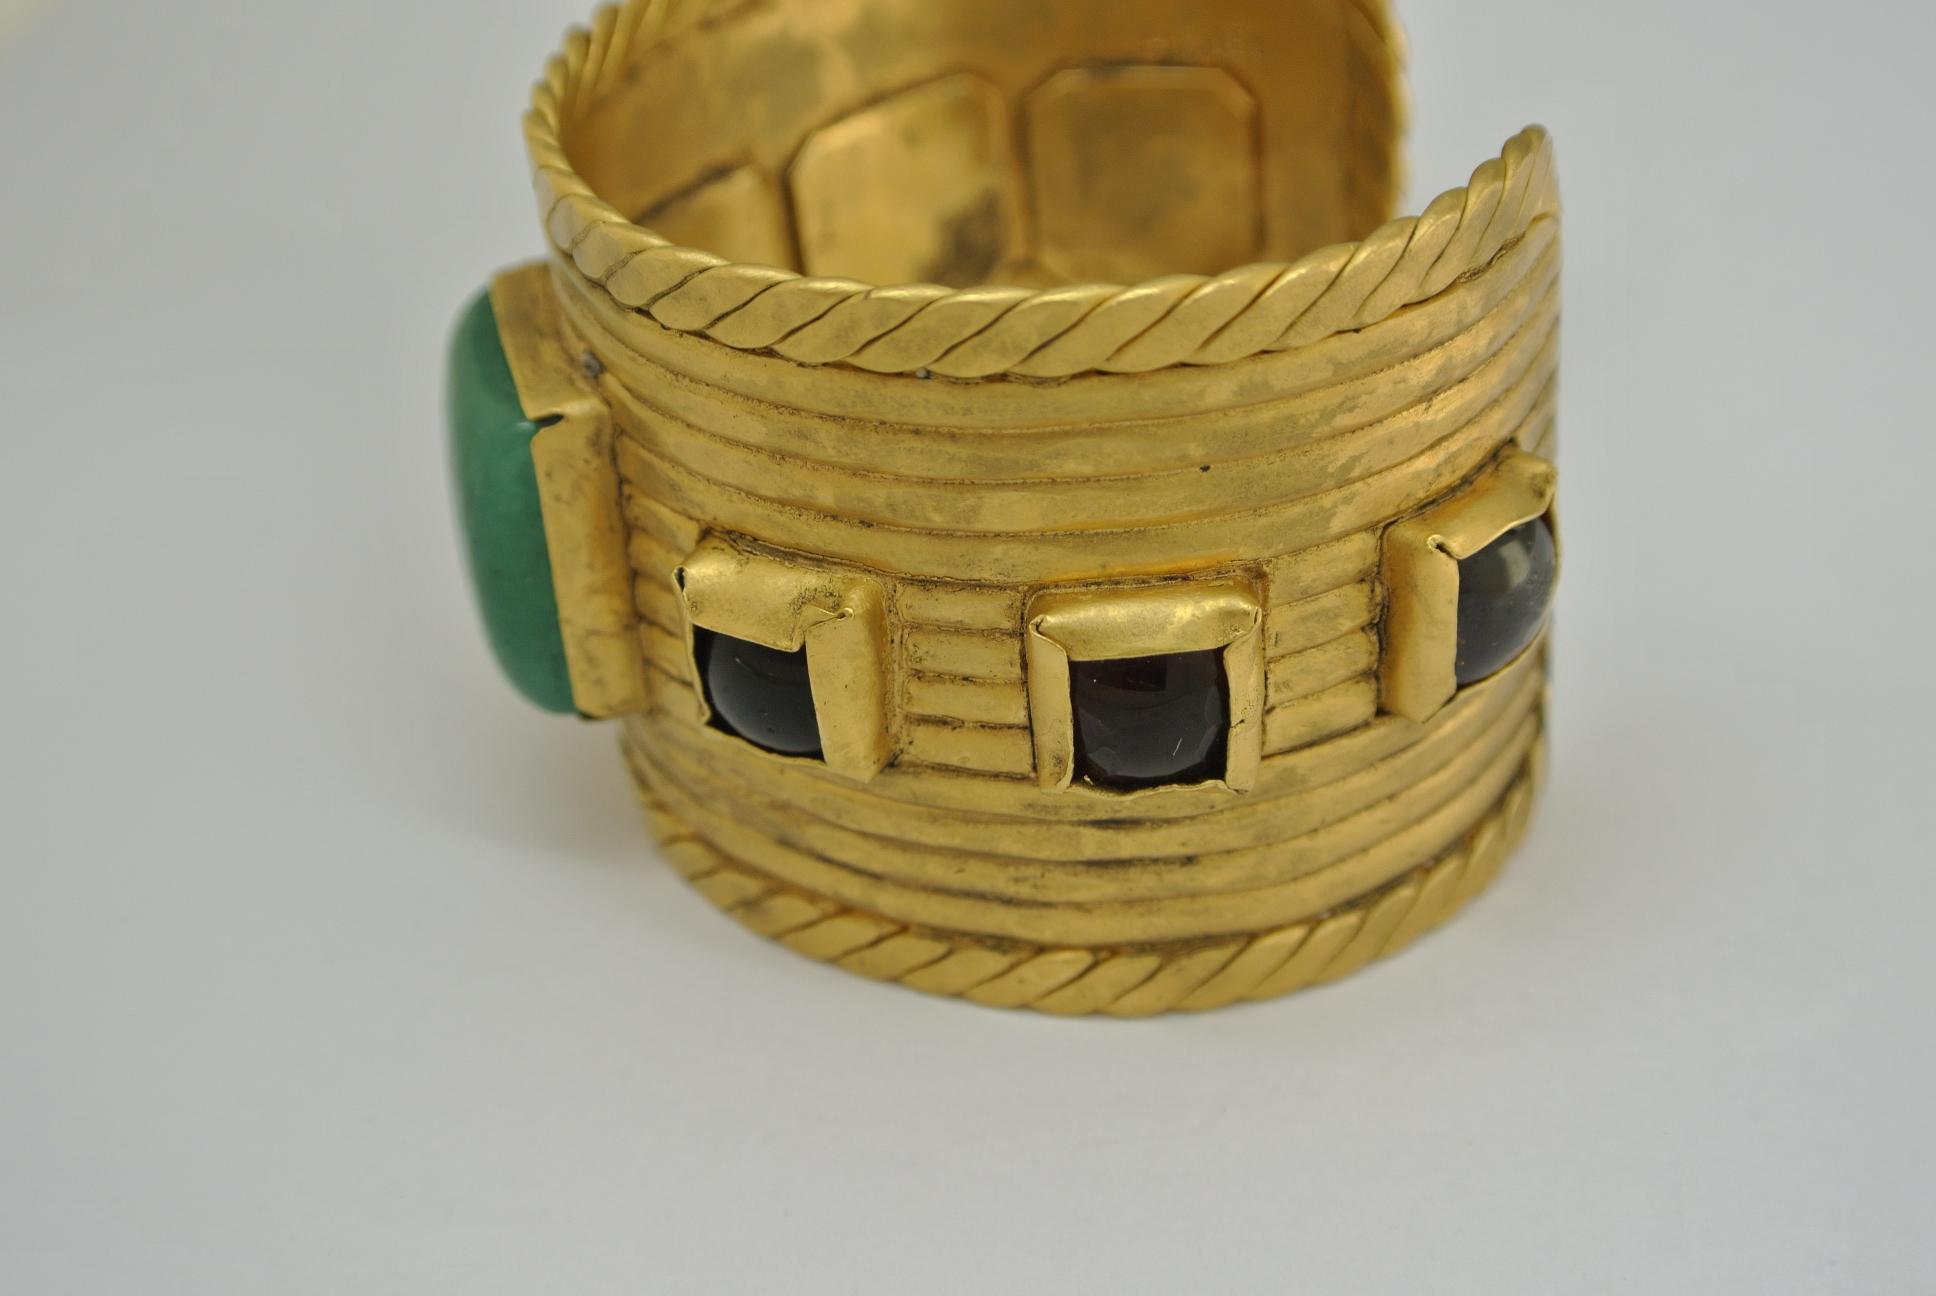 Vintage Chanel green Gripoix Glass Byzantine Statement Bracelet Cuff In Good Condition For Sale In London, GB